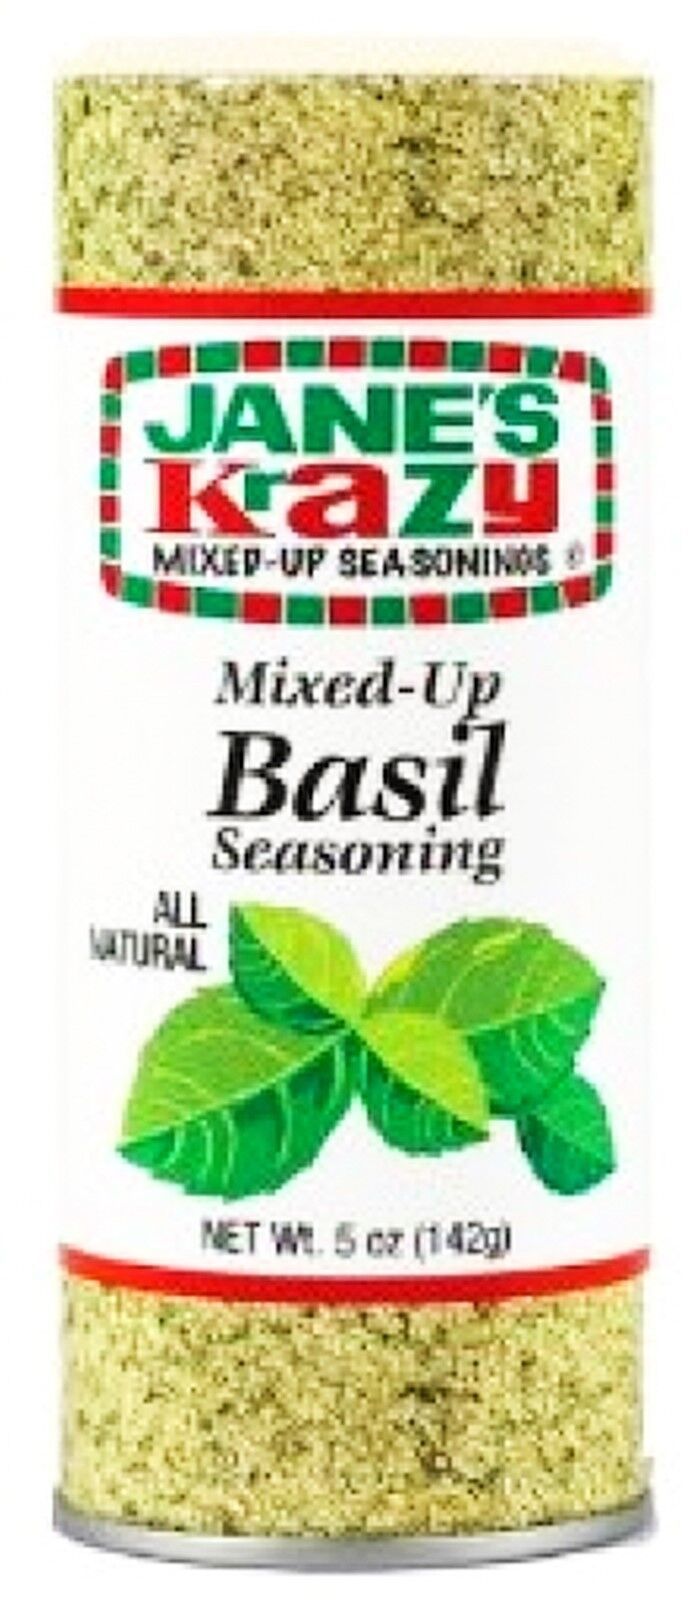 JANE'S Krazy Mixed Up BASIL SEASONING All Natural All Purpose Spice Blend 251280 - $18.06